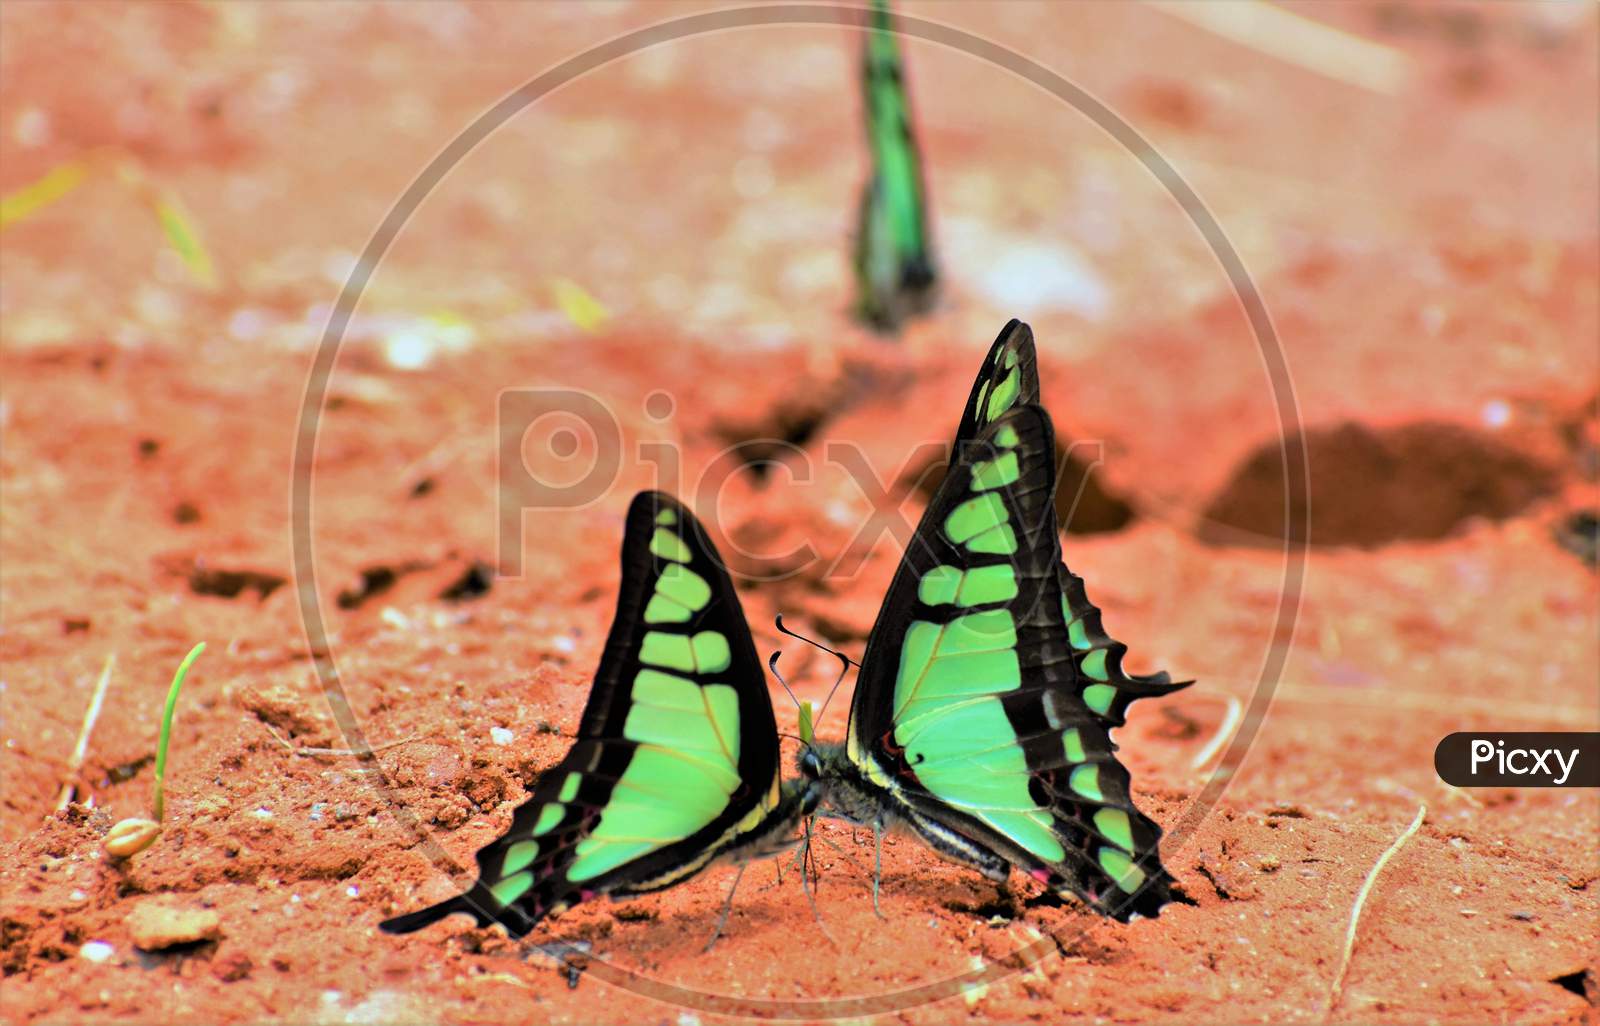 Butterfly (Glassy Bluebottle) showing love interaction during mud puddling and